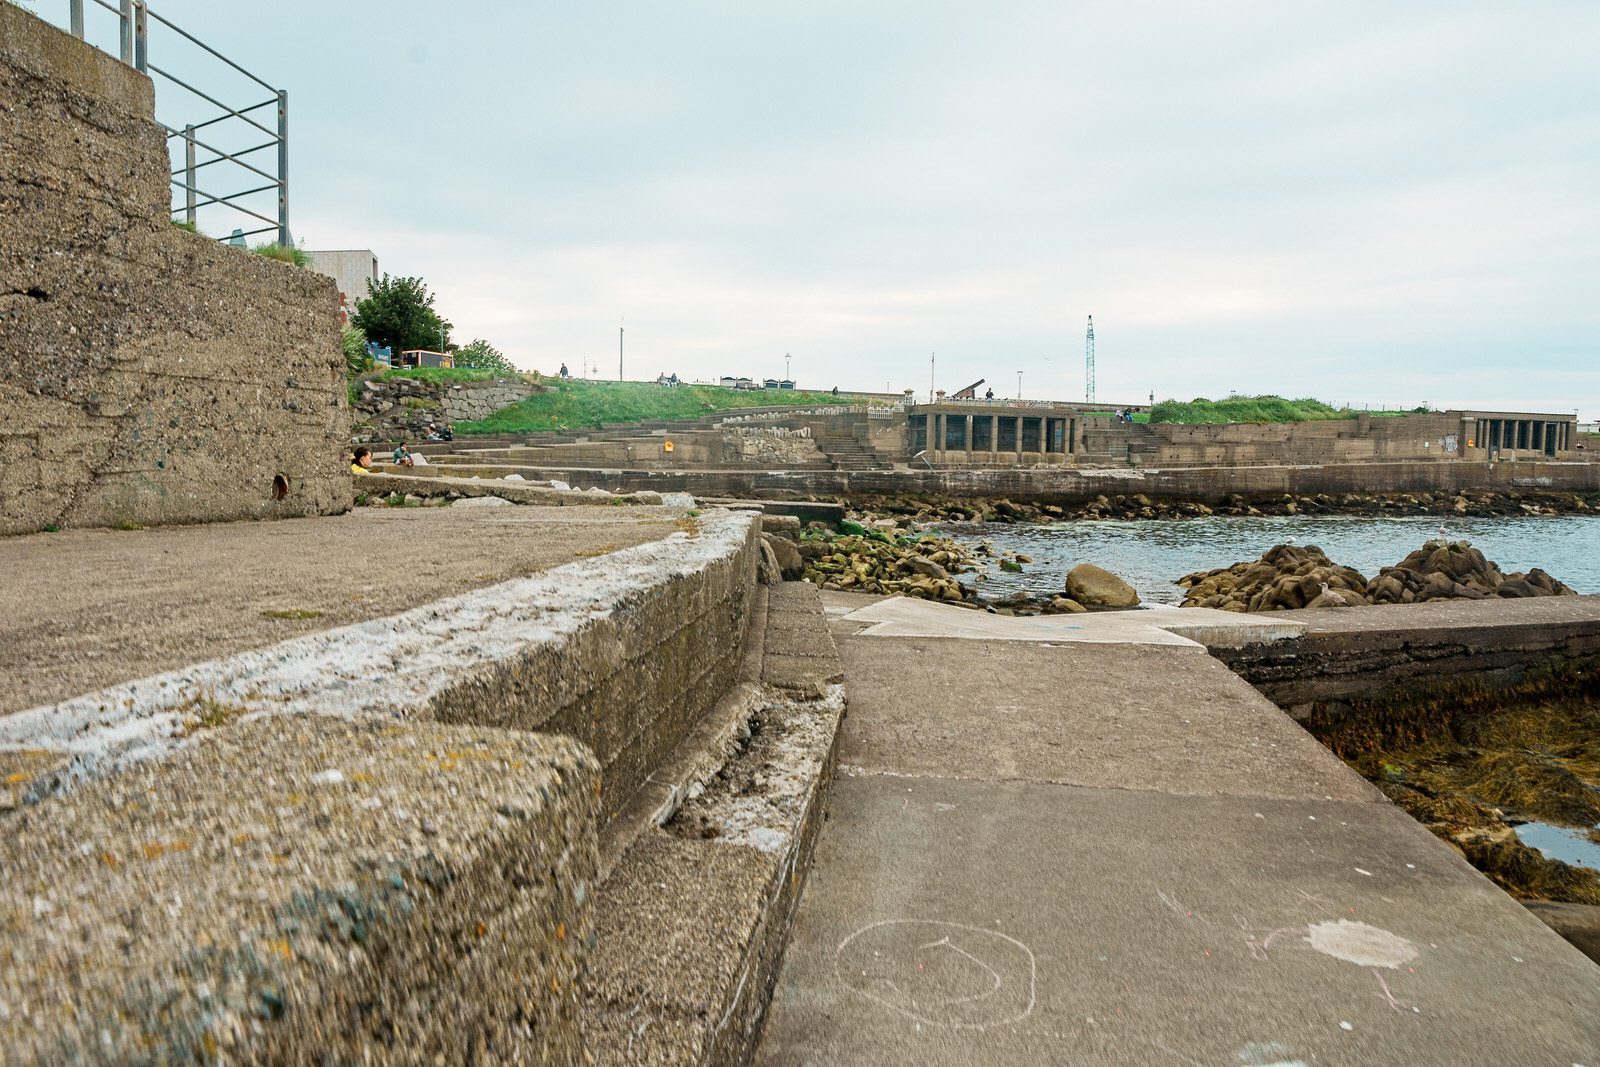 BETWEEN DUN LAOGHAIRE EAST PIER AND THE BATHS [THIS AREA HAS BEEN BADLY NEGLECTED] 003